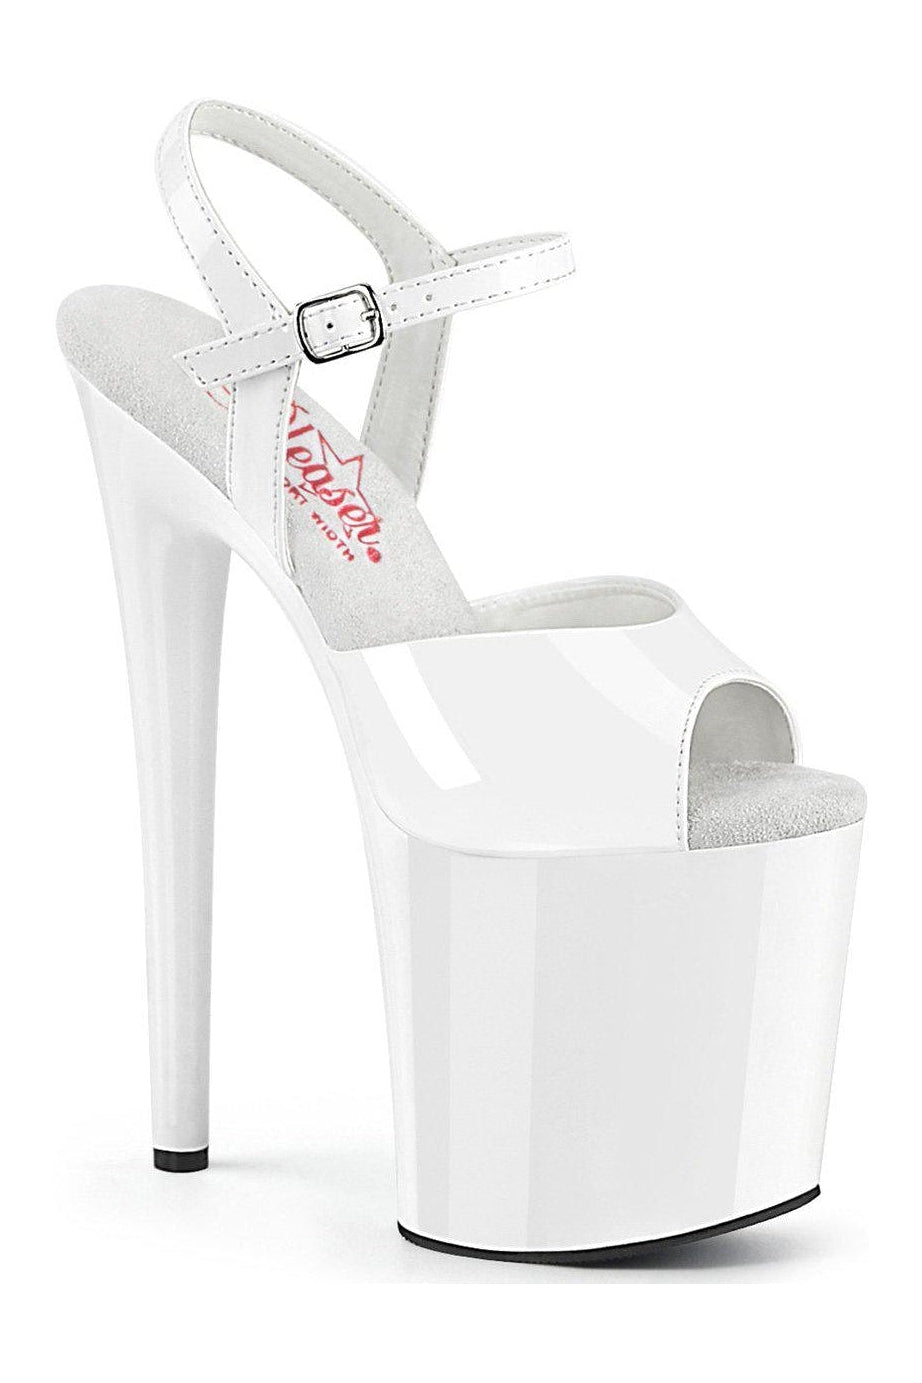 NAUGHTY-809 Sandal | White Patent-Sandals-Pleaser-White-11-Patent-SEXYSHOES.COM